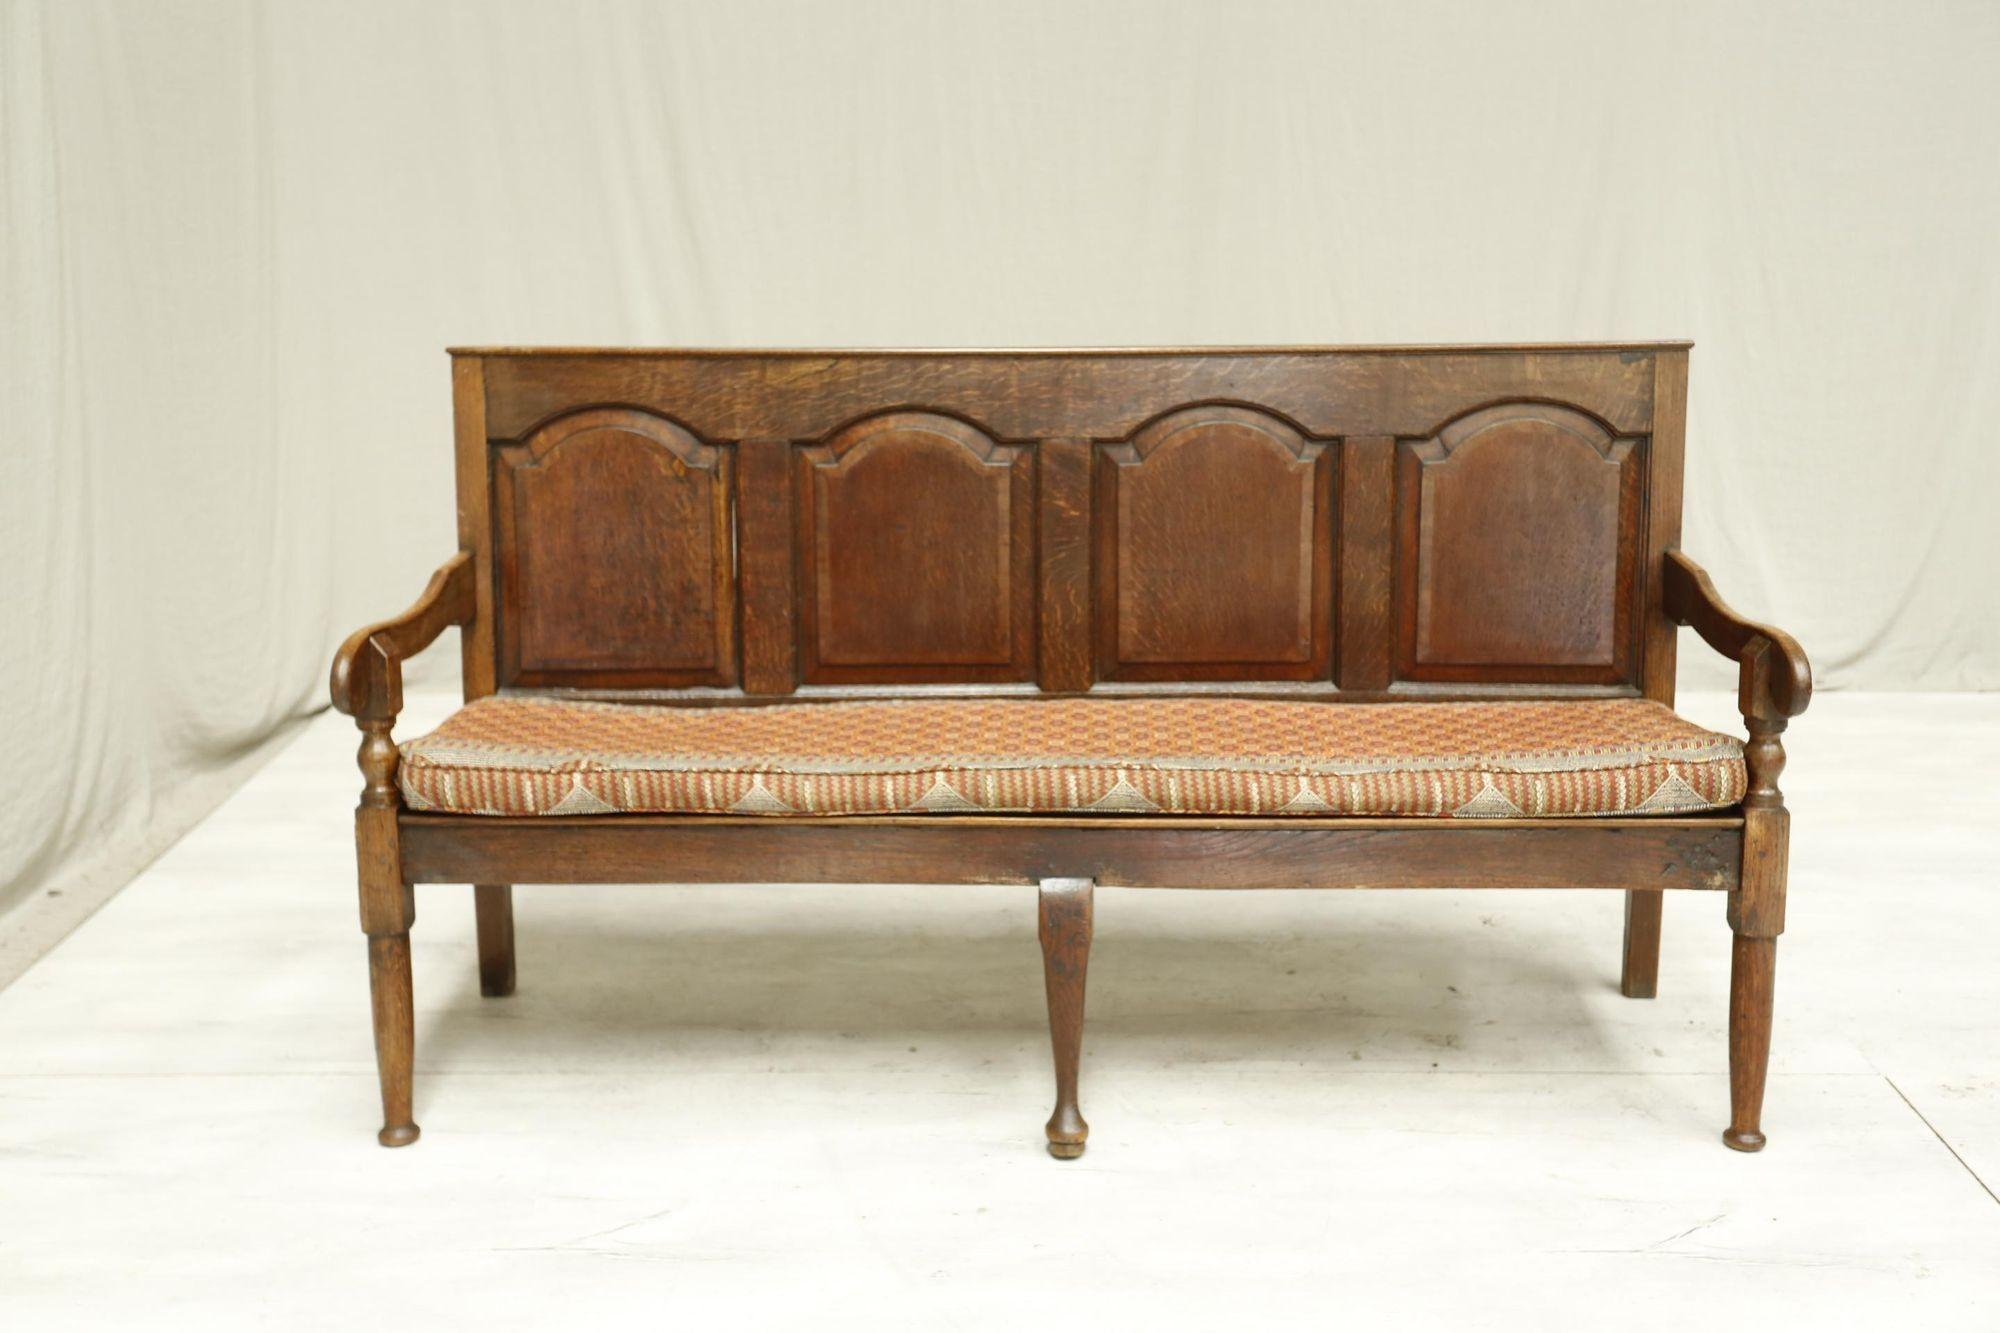 This is a very attractive 18th century oak settle with a beautiful upholstered seat cushion in a kilim type fabric. The overall condition is very good with no weak joints or major faults. It is totally original so it has its quirks which make it all